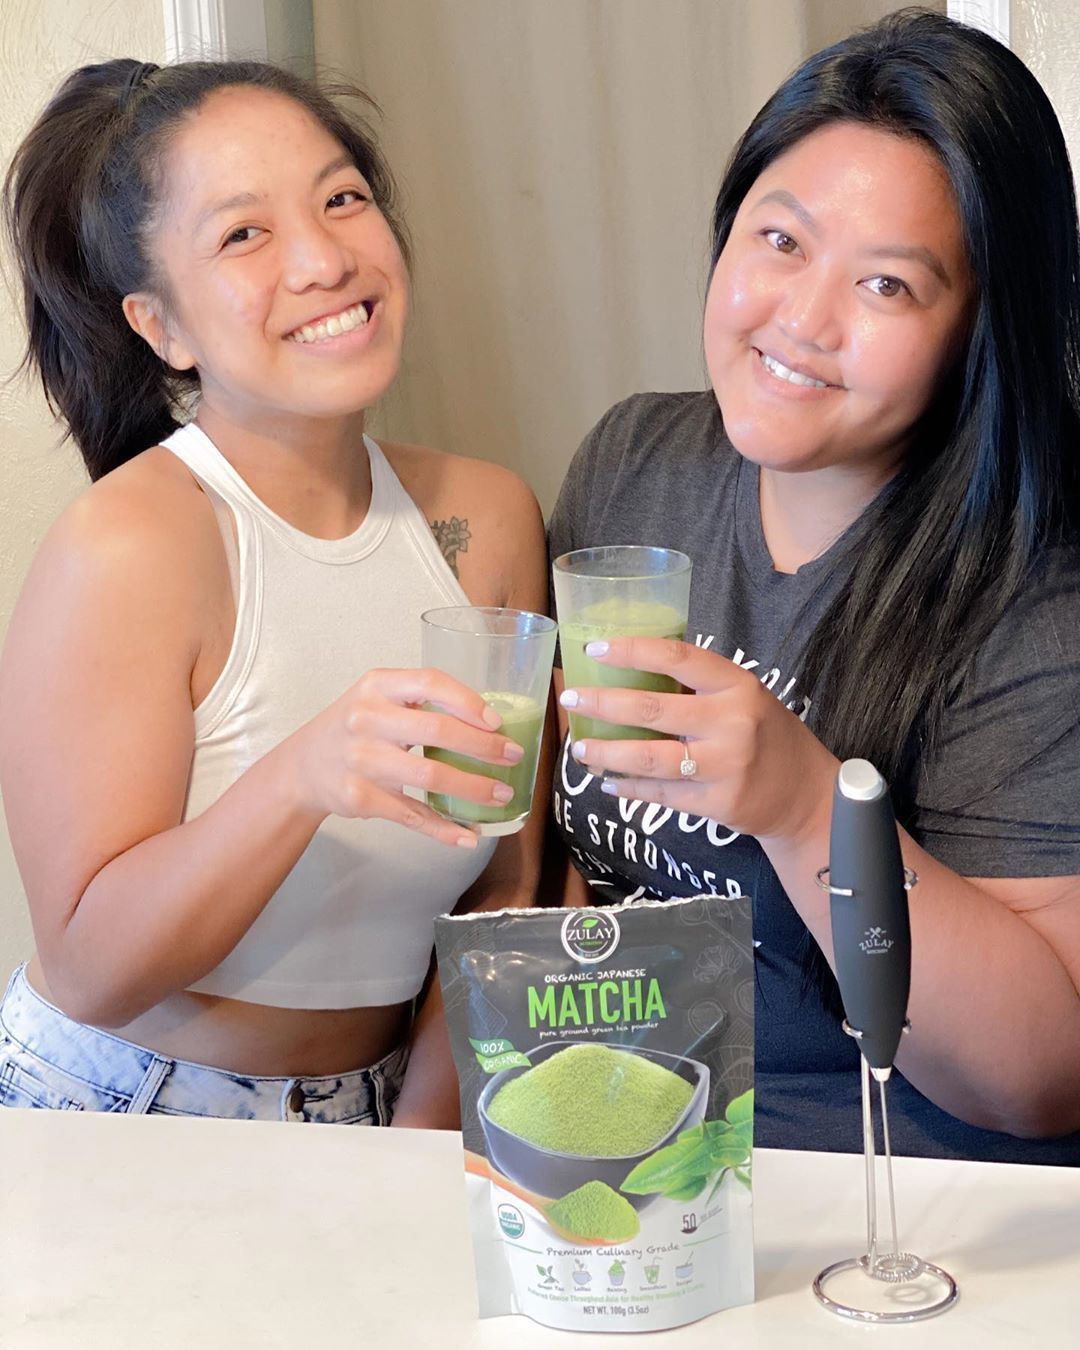 Irene Nicole Karlin Makes Hot Or Cold Matcha Latte Using The Zulay Matcha Powder And Milk Frother! - Zulay Kitchen